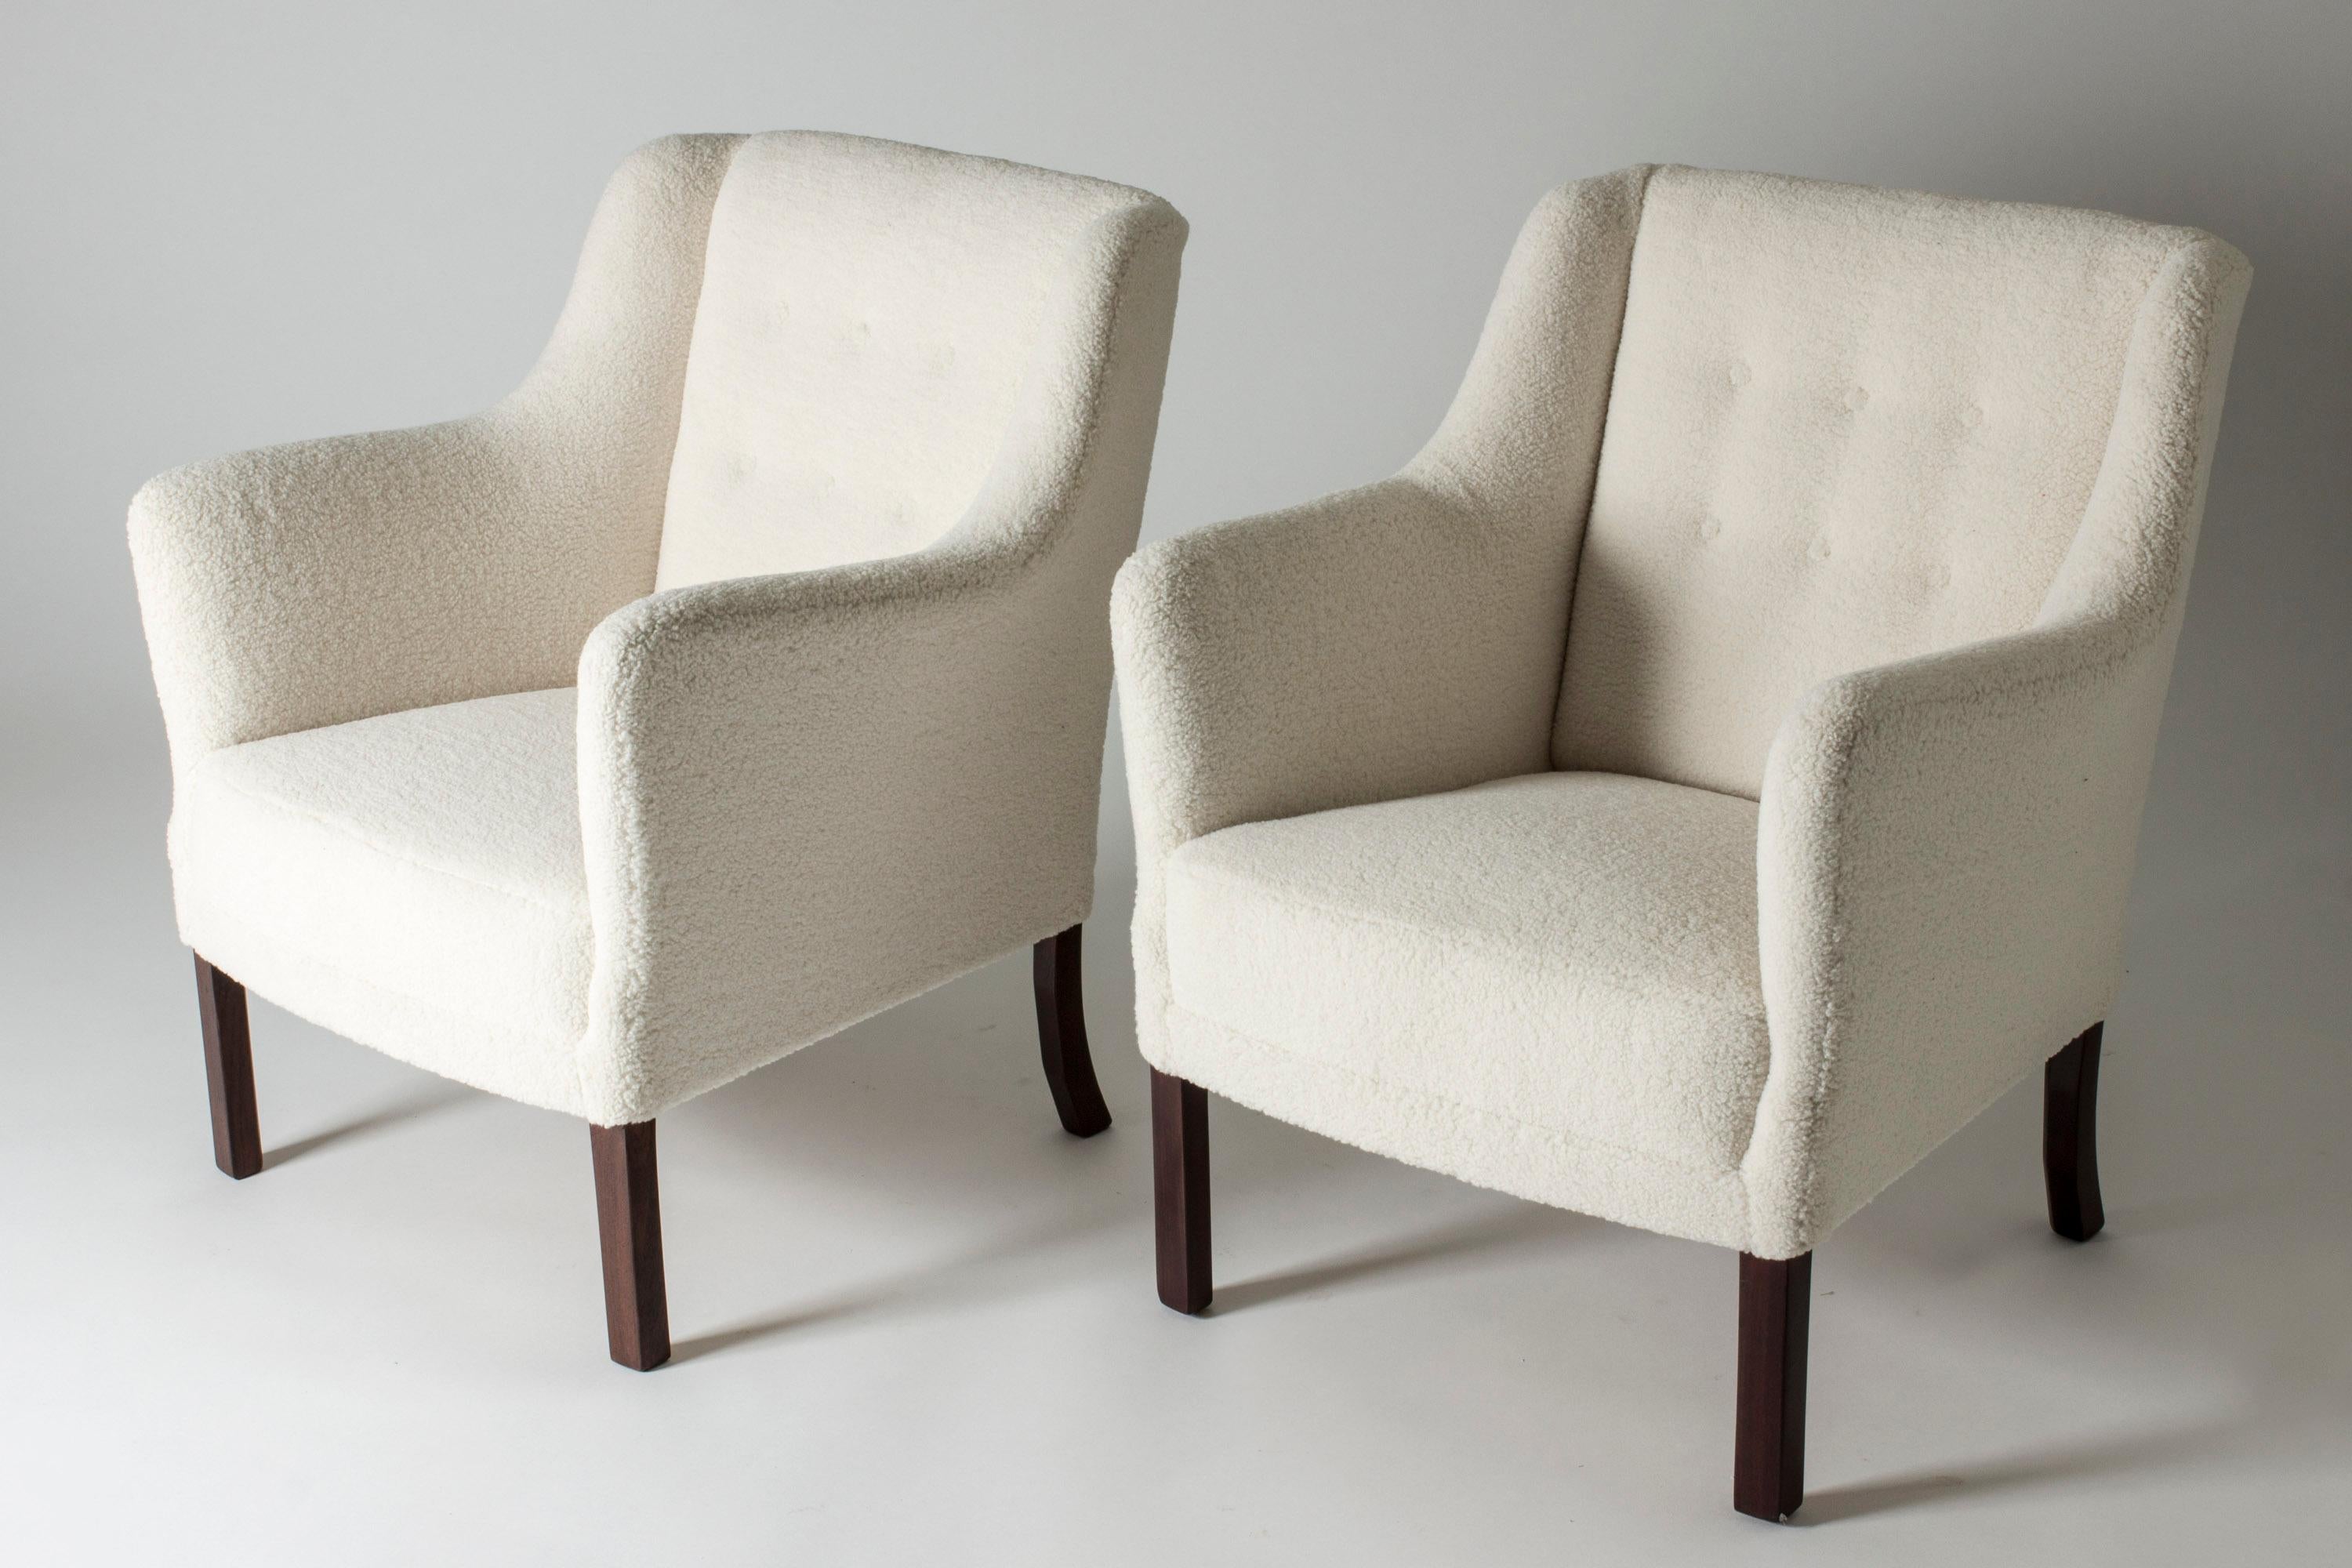 Pair of elegant lounge chairs by Einar Larsen. Contemporary look, upholstered with white bouclé fabric. Designed in 1945.